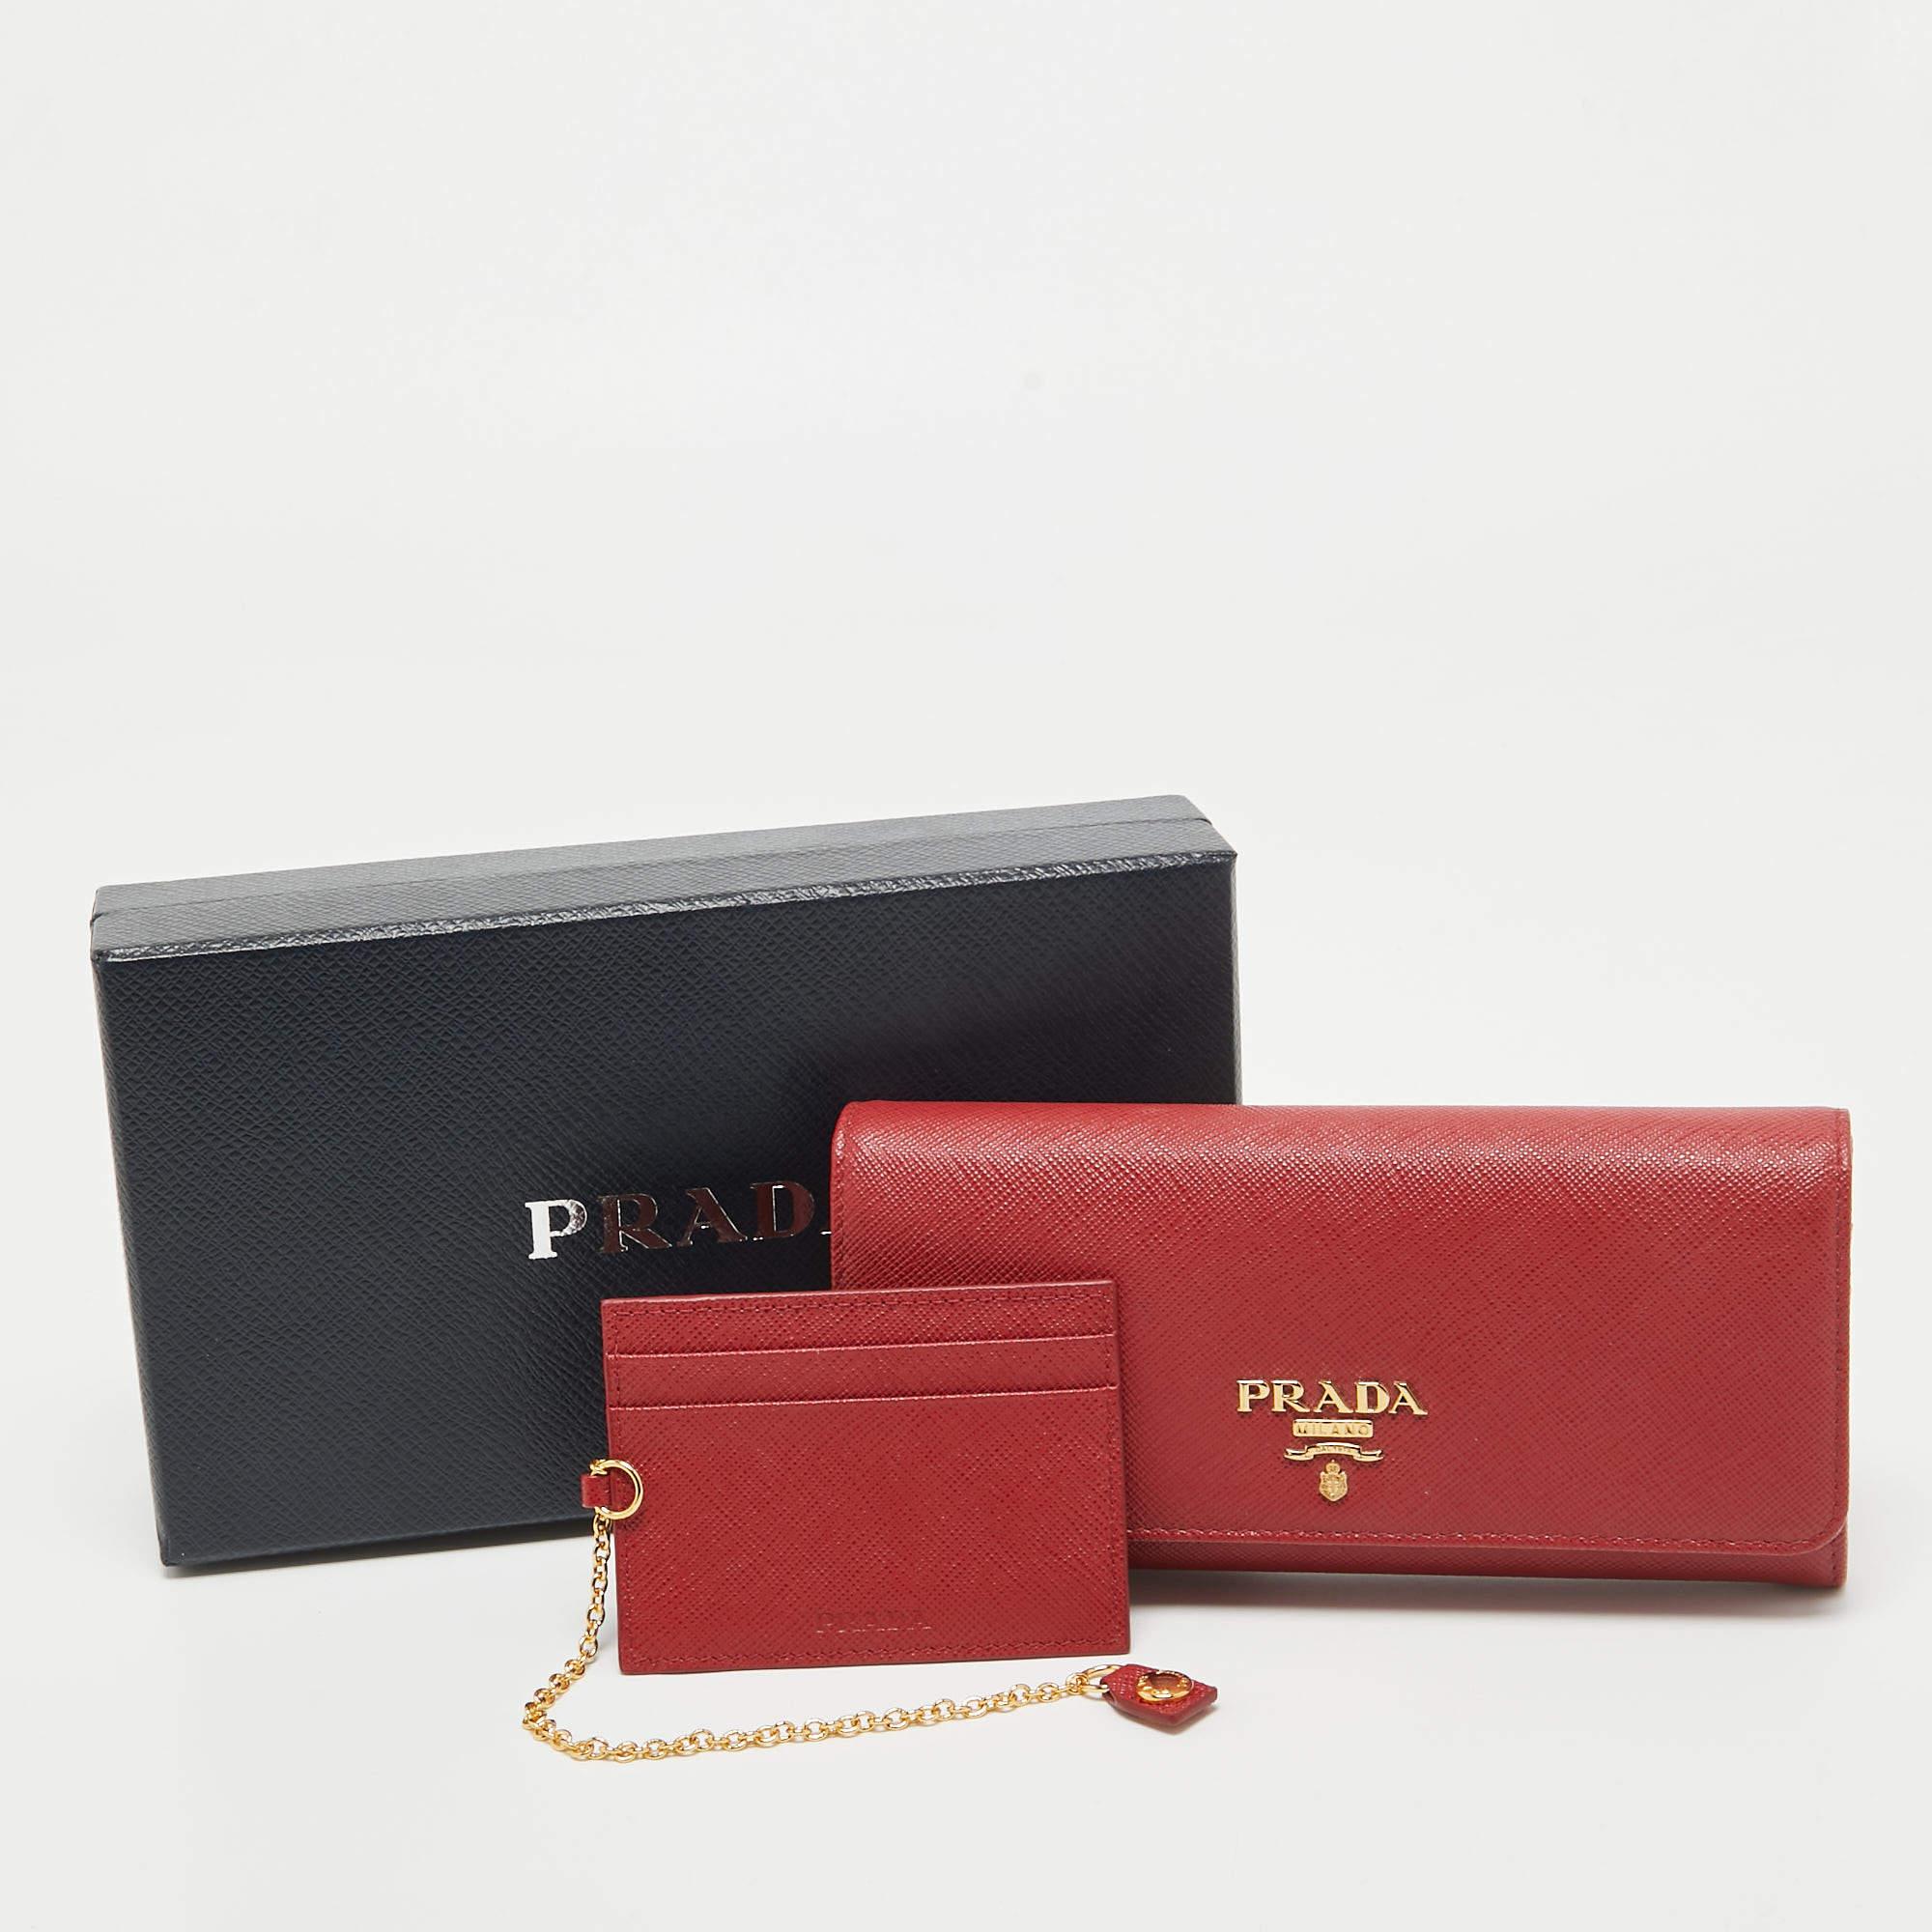 Prada Red Saffiano Leather Flap Continental Wallet 5